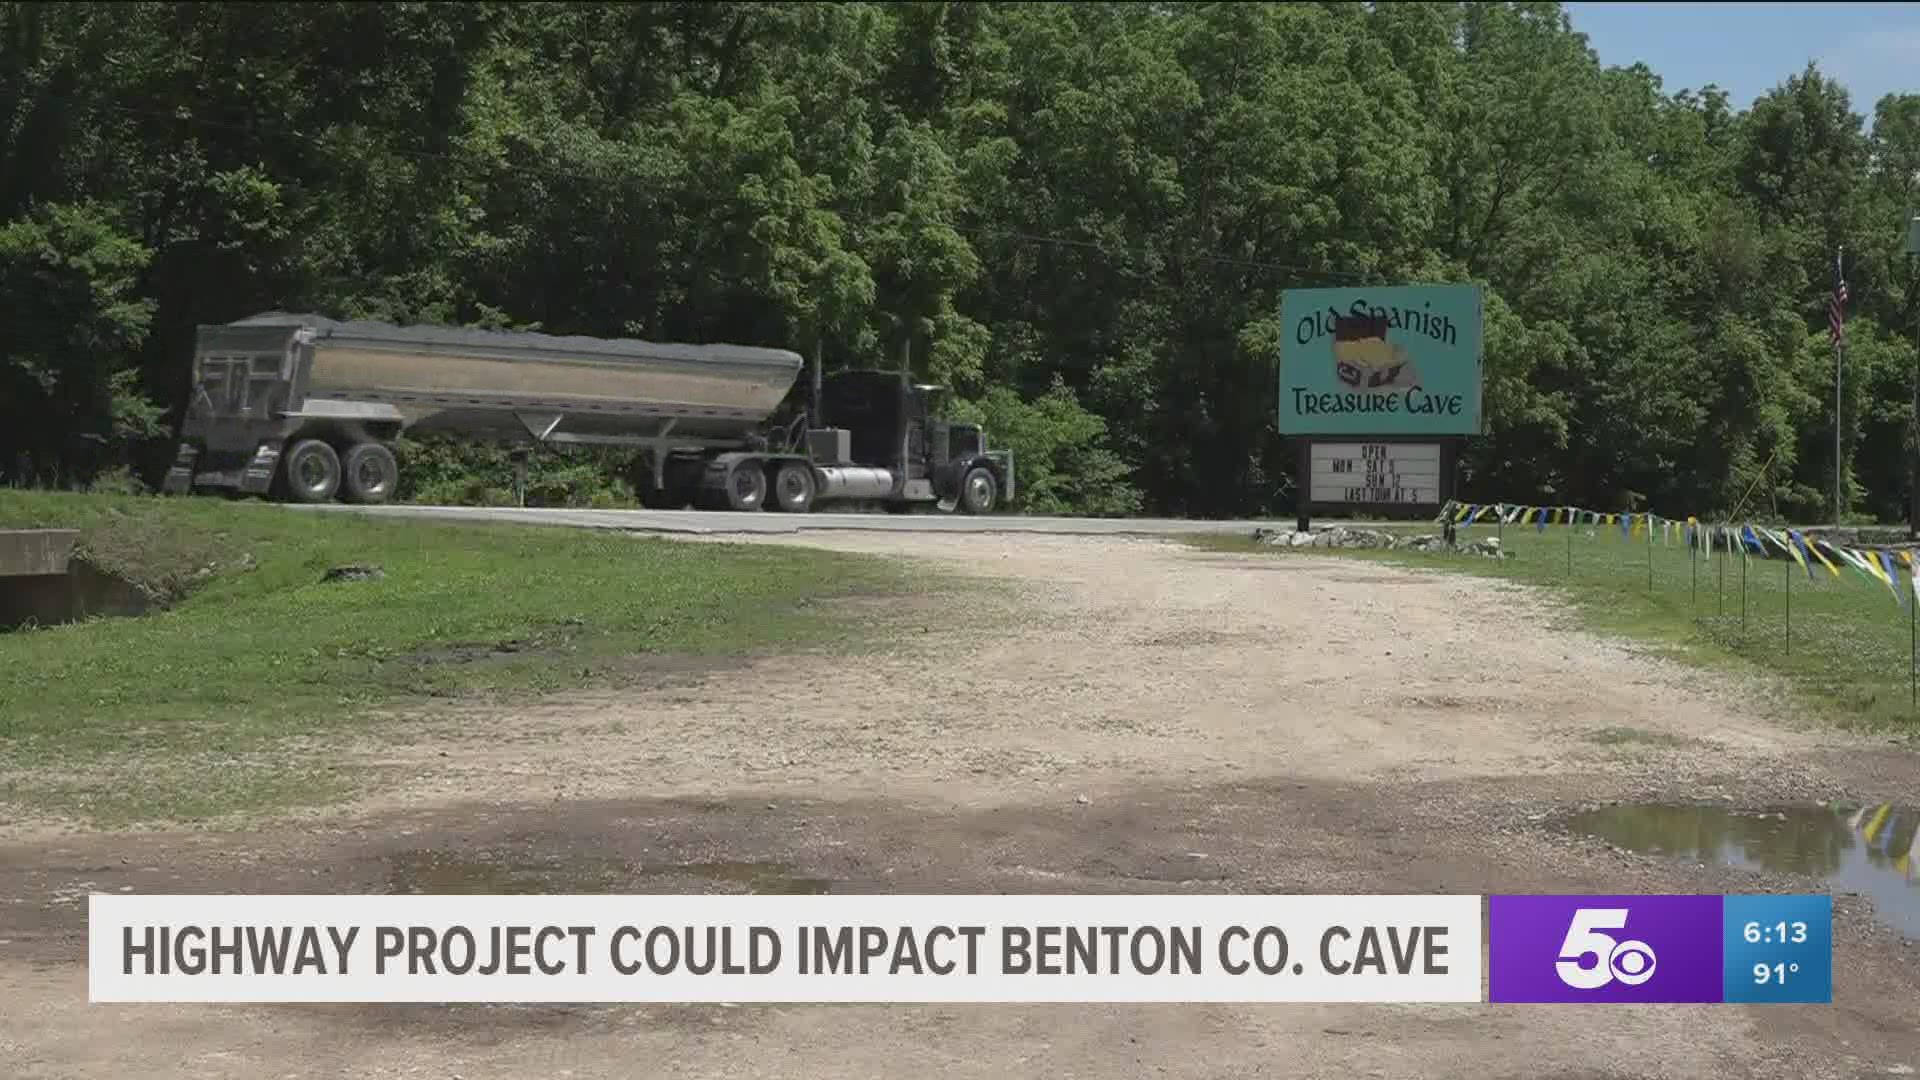 This proposed project would take out much of the parking lot and disrupt one of the cave systems not only impacting this tourist attractions business but also nature